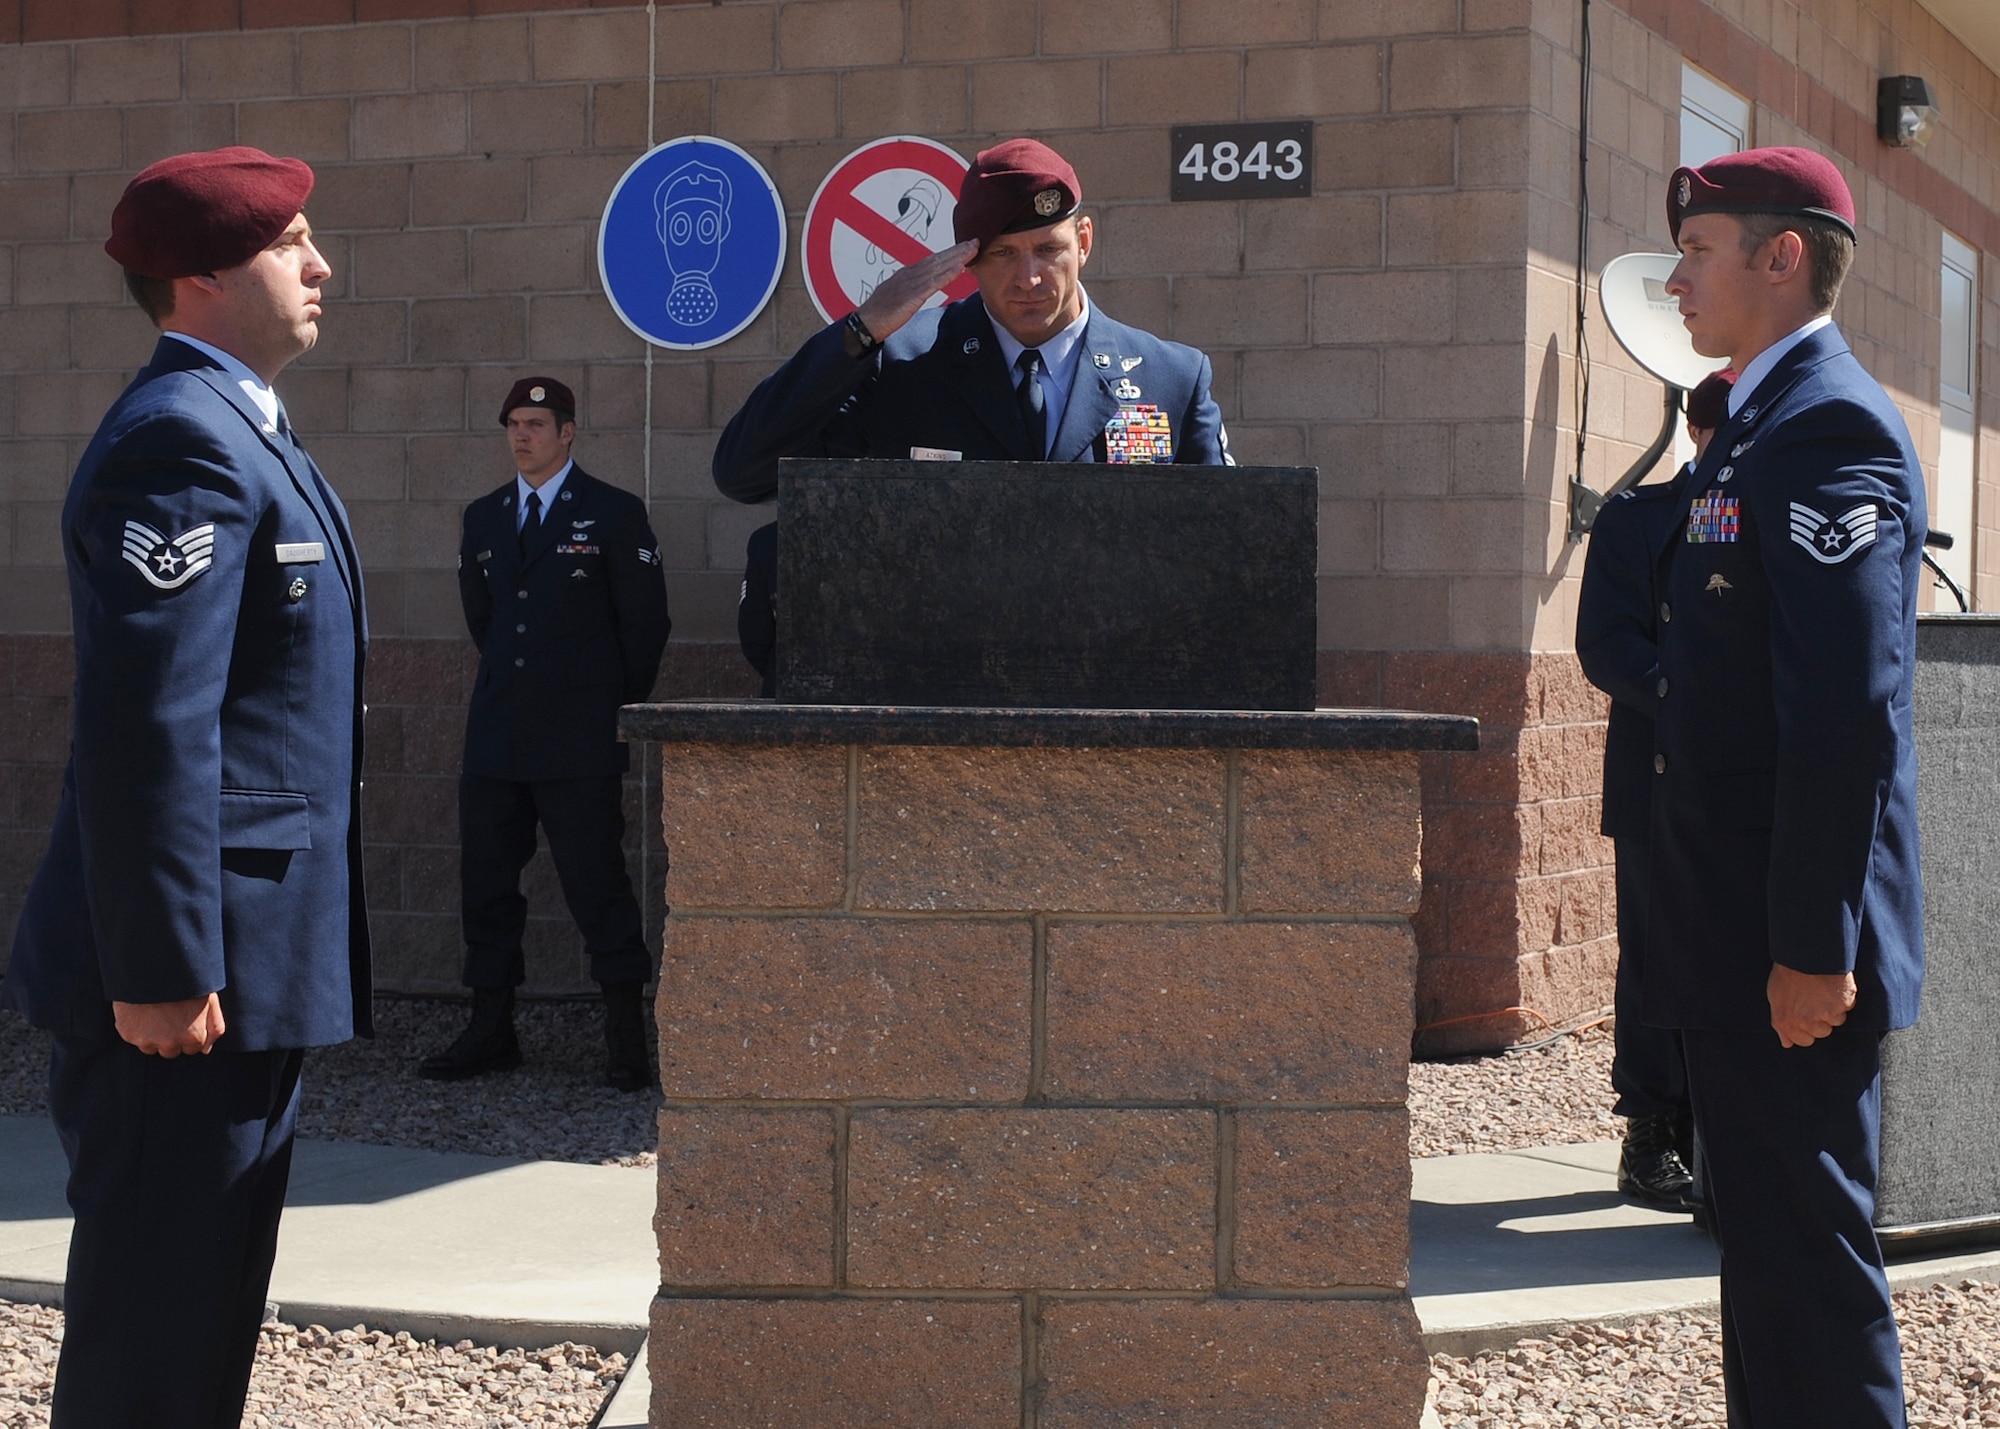 DAVIS-MONTHAN AIR FORCE BASE, Ariz. – Senior Master Sgt. Michael Atkins (middle), 48th Rescue Squadron, salutes a newly unveiled memorial plaque while Staff Sgt. Brandon Daugherty (left) and Staff Sgt. Brent Moore, both members of the 48th RQS, stand at attention here June 9. The memorial plaque honors Tech. Sgt. Michael Flores and Senior Airman Benjamin White, both pararescuemen from the 48th RQS, who were killed in the Pedro 66 crash in Afghanistan June 9, 2010